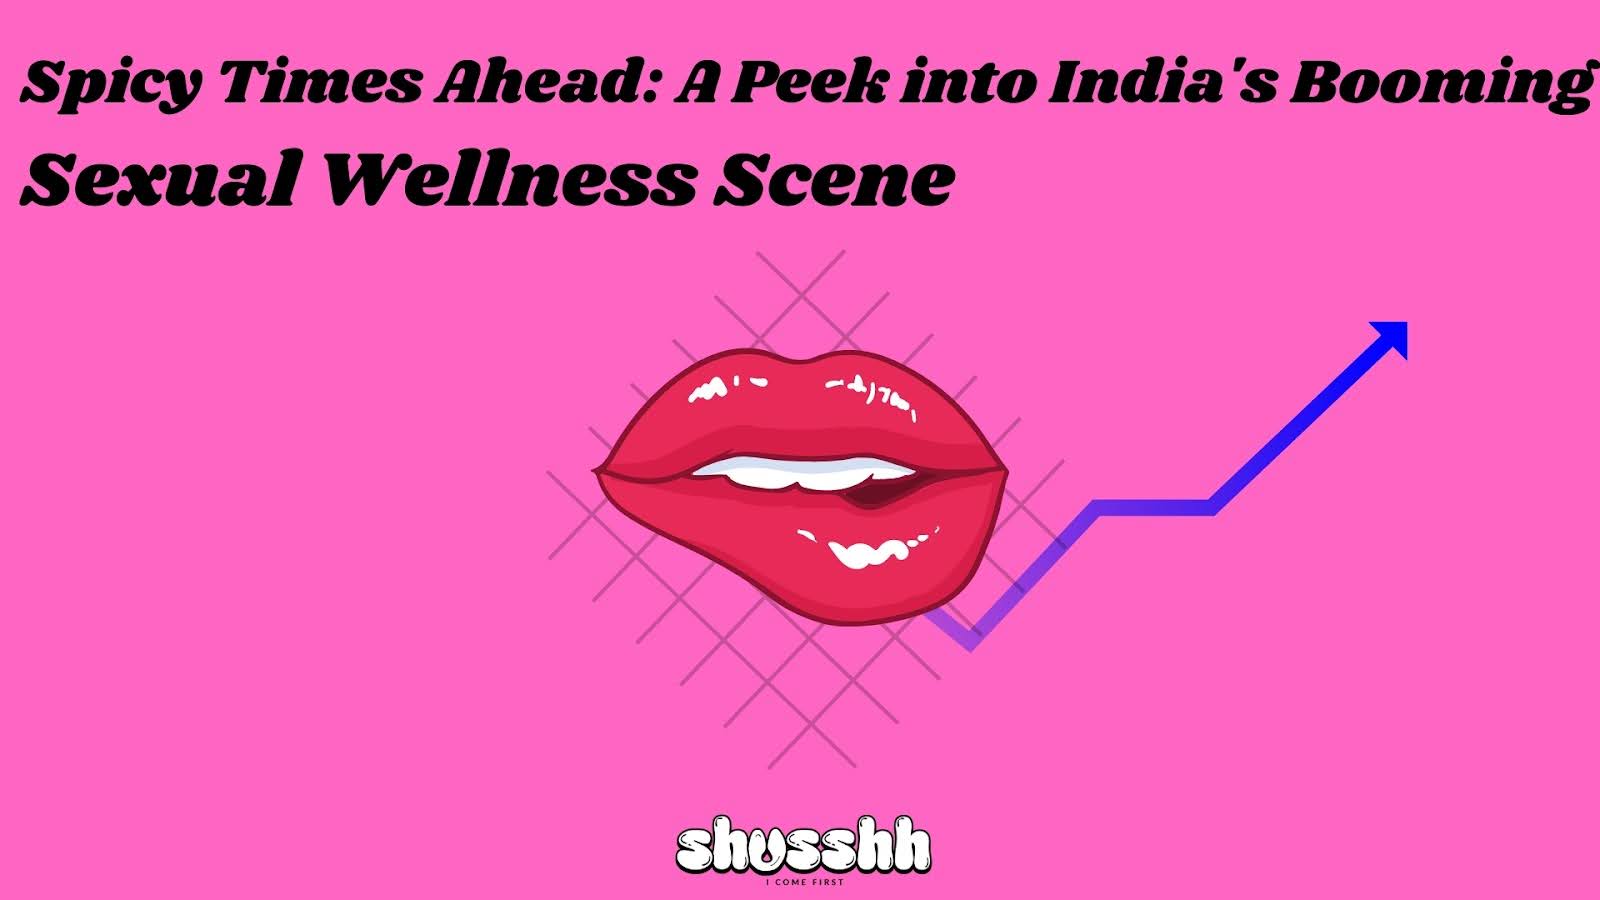 Spicy Times Ahead: A Peek into India's Booming Sexual Wellness Scene